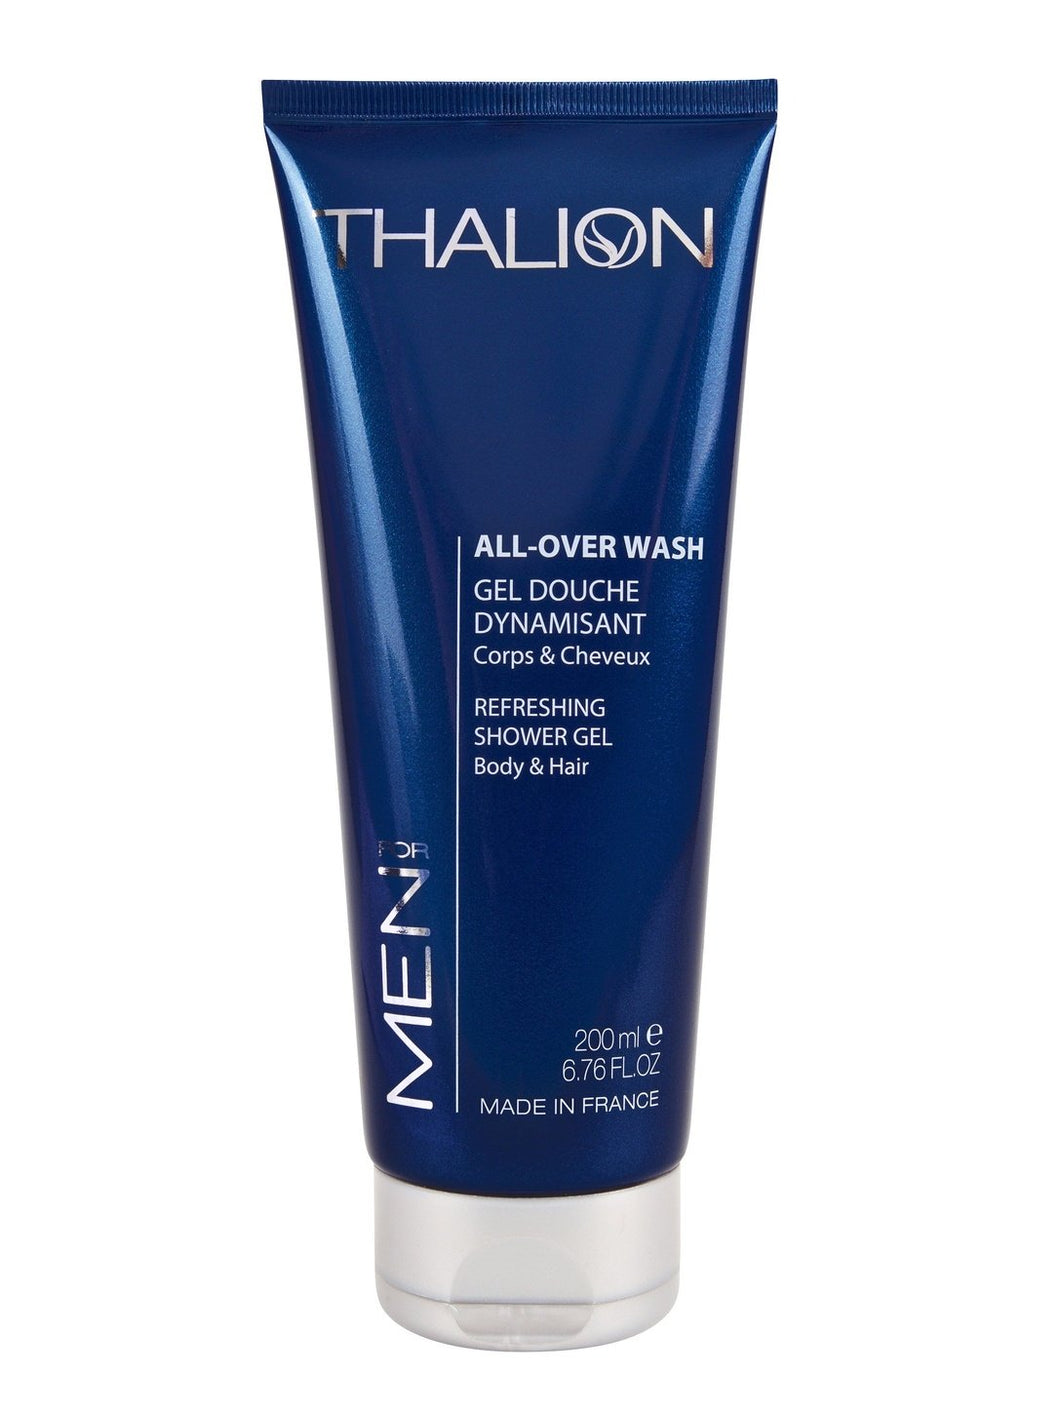 All-Over Wash : Gel Douche Dynamisant Corps & Cheveux - Thalion